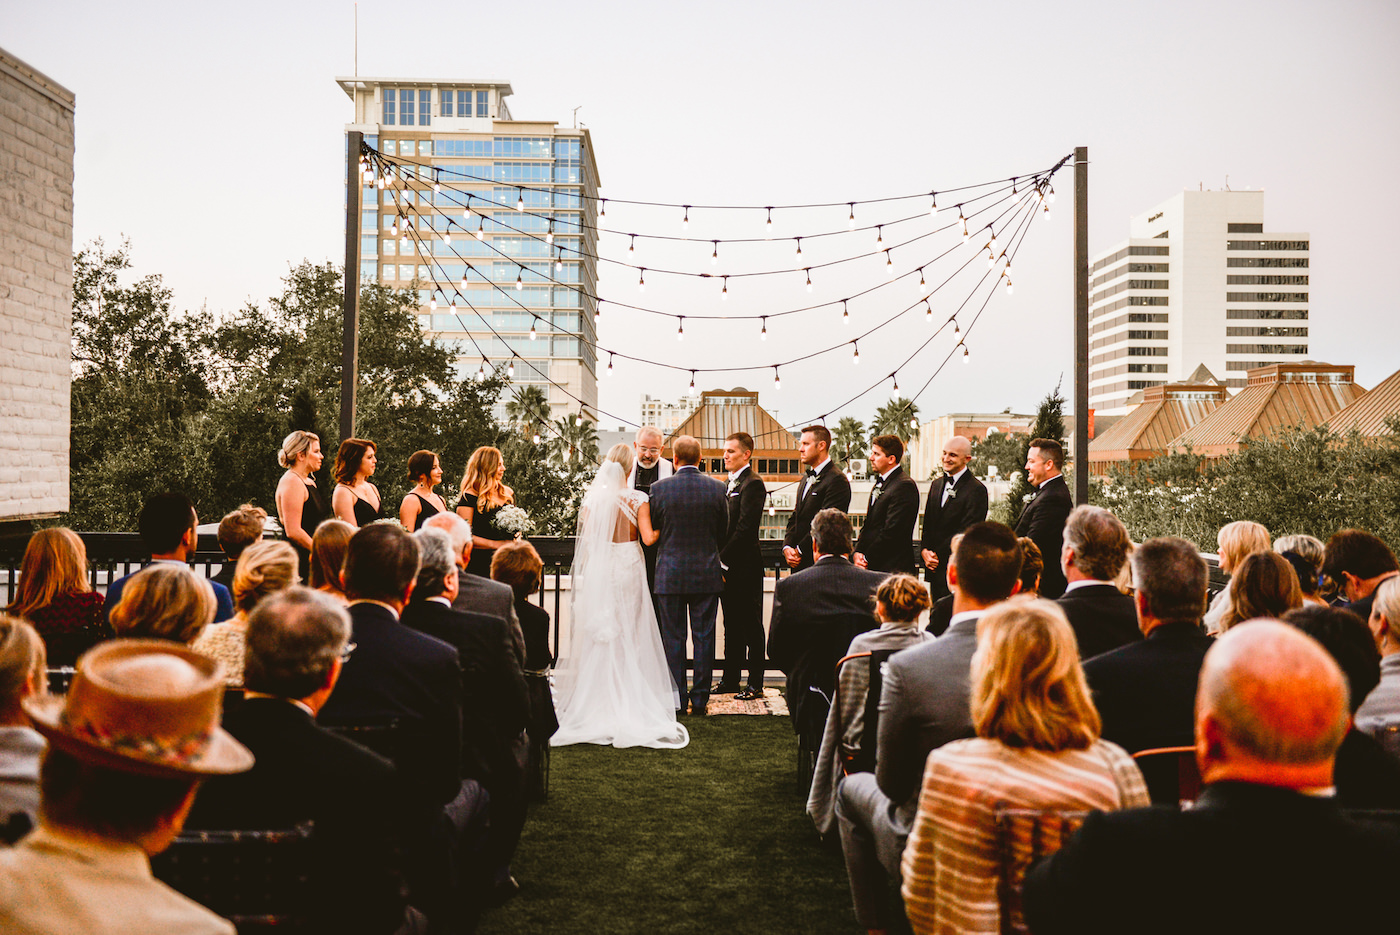 Black and White Outdoor Rooftop Wedding Ceremony with Edison Bulb Backdrop | Downtown St. Pete Wedding Venue Station House